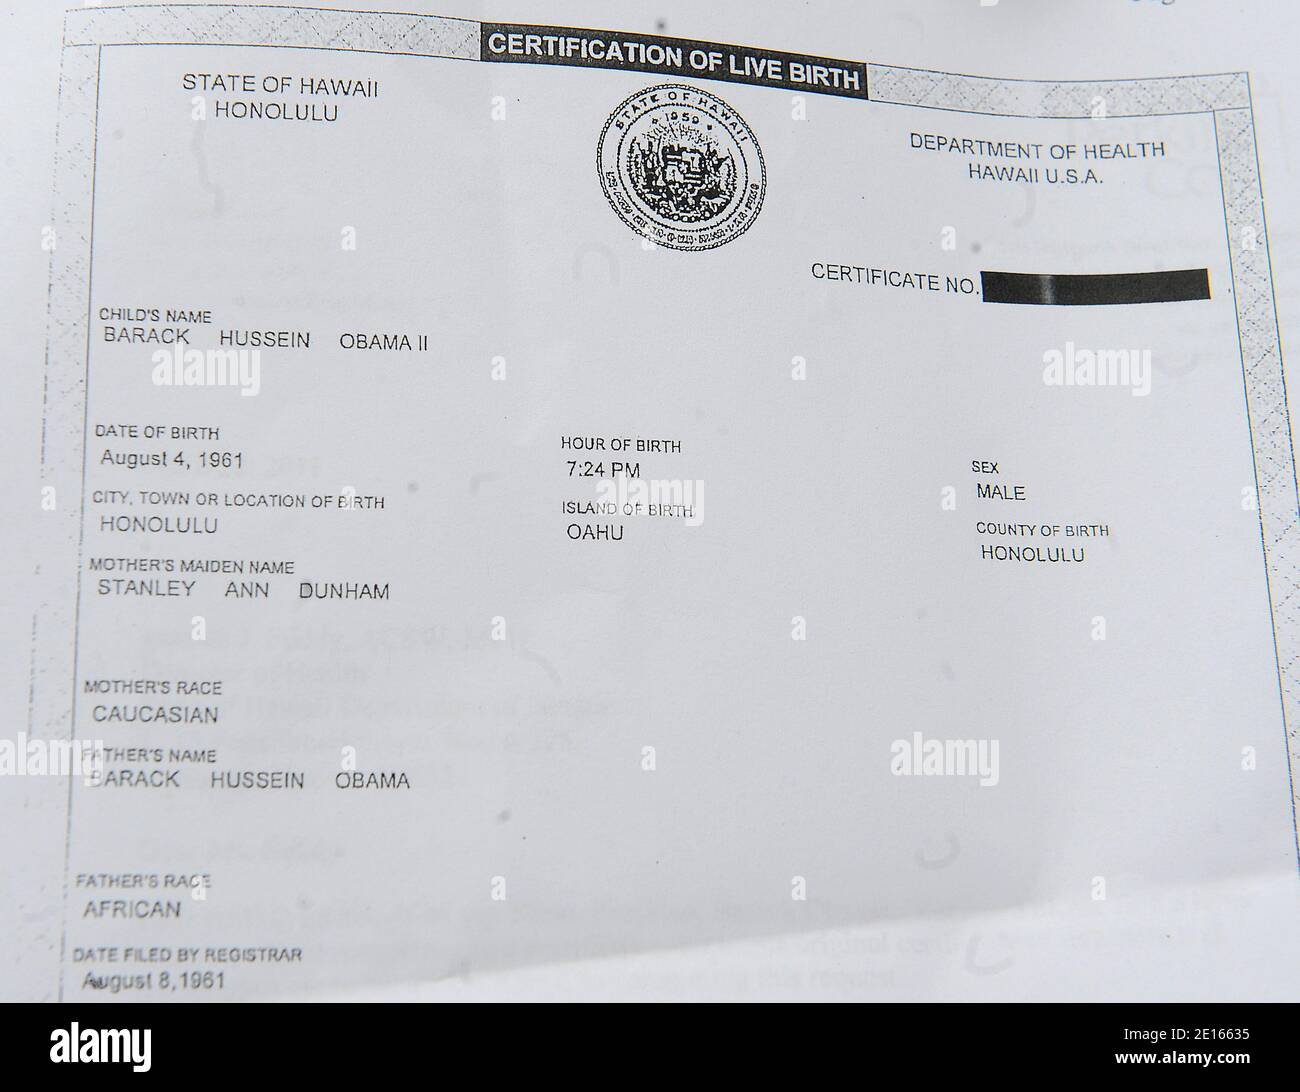 Birth Certificate Usa High Resolution Stock Photography And Images - Alamy